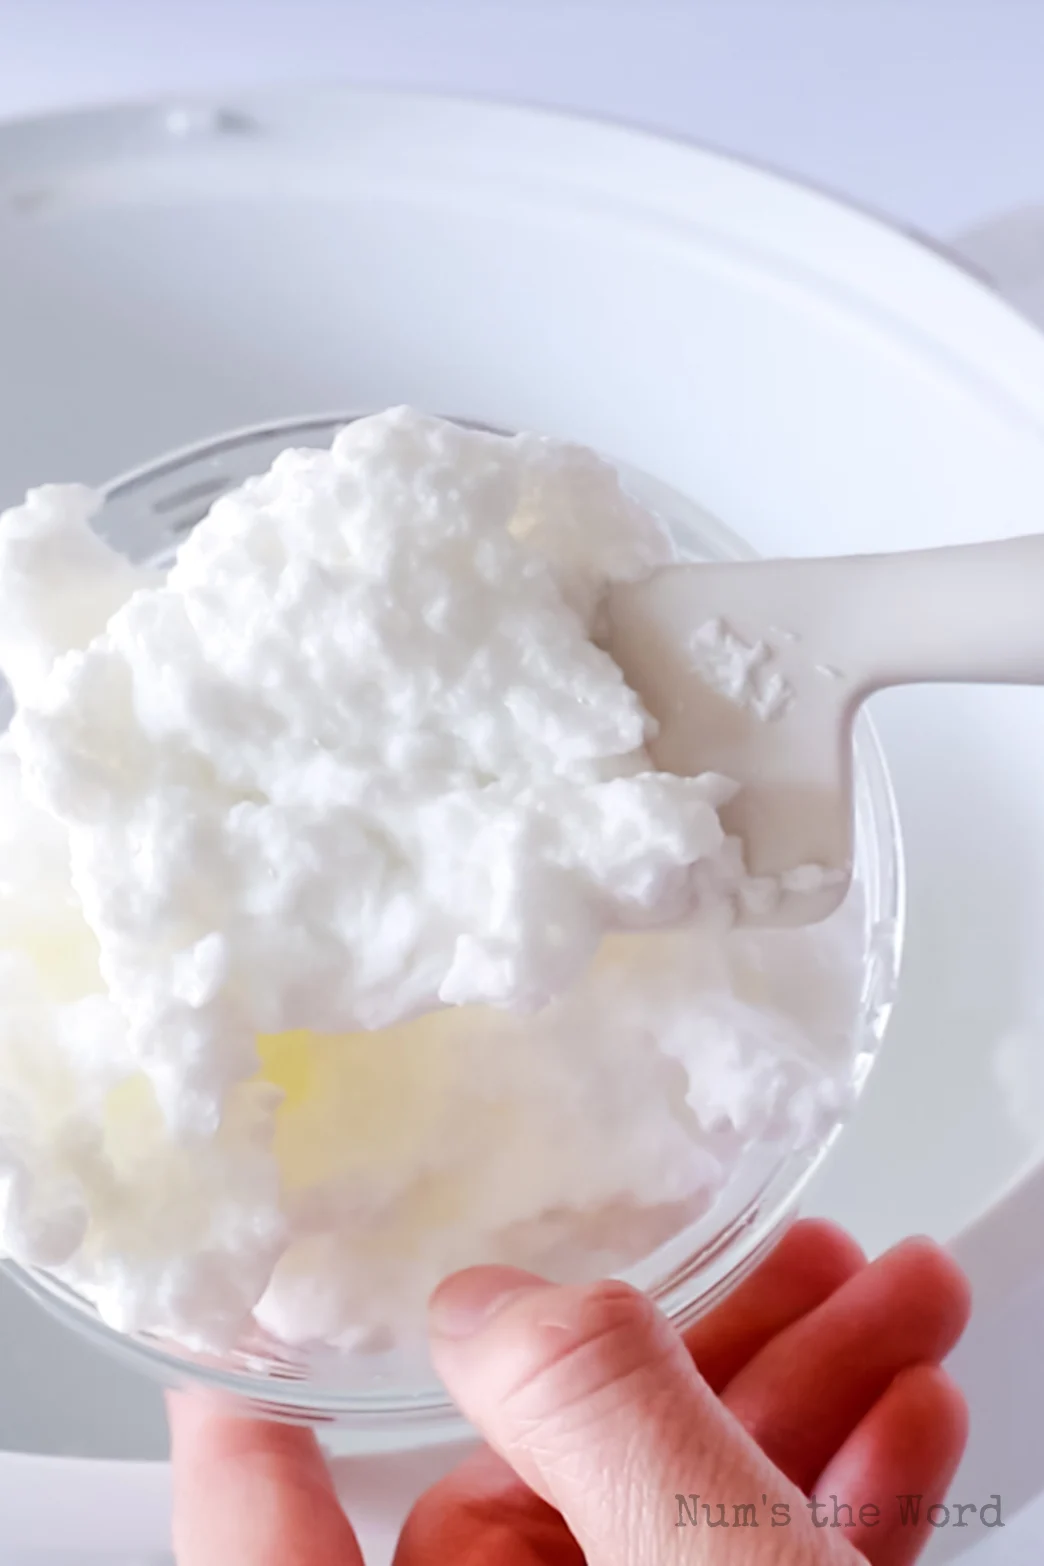 Fluffy 2 minute Egg Whites from the Bosch mixer